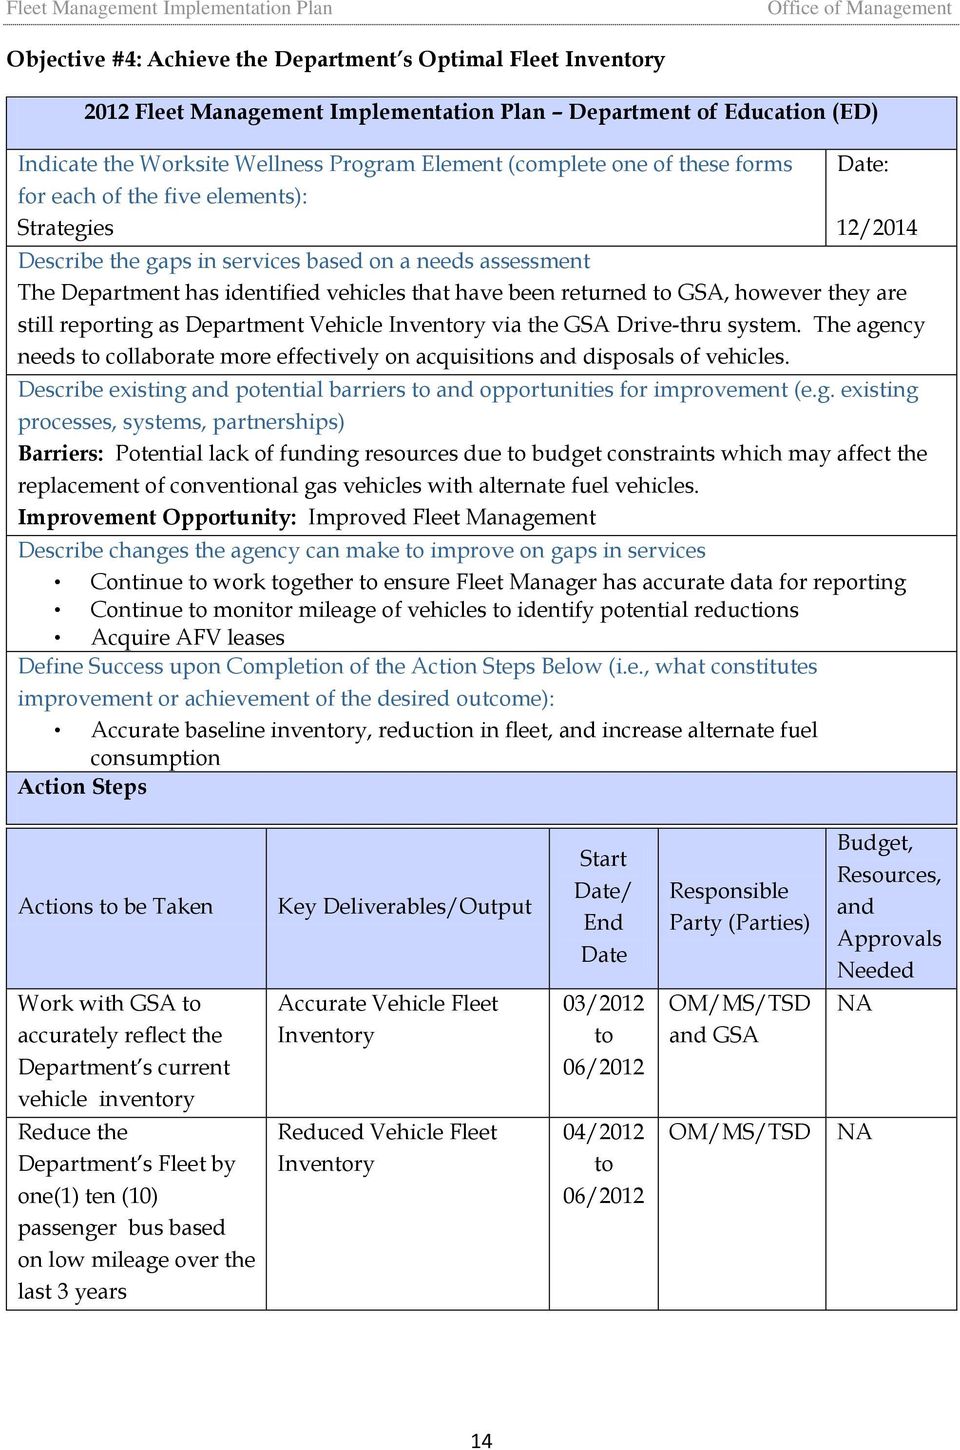 however they are still reporting as Department Vehicle Inventory via the GSA Drive-thru system. The agency needs to collaborate more effectively on acquisitions disposals of vehicles.